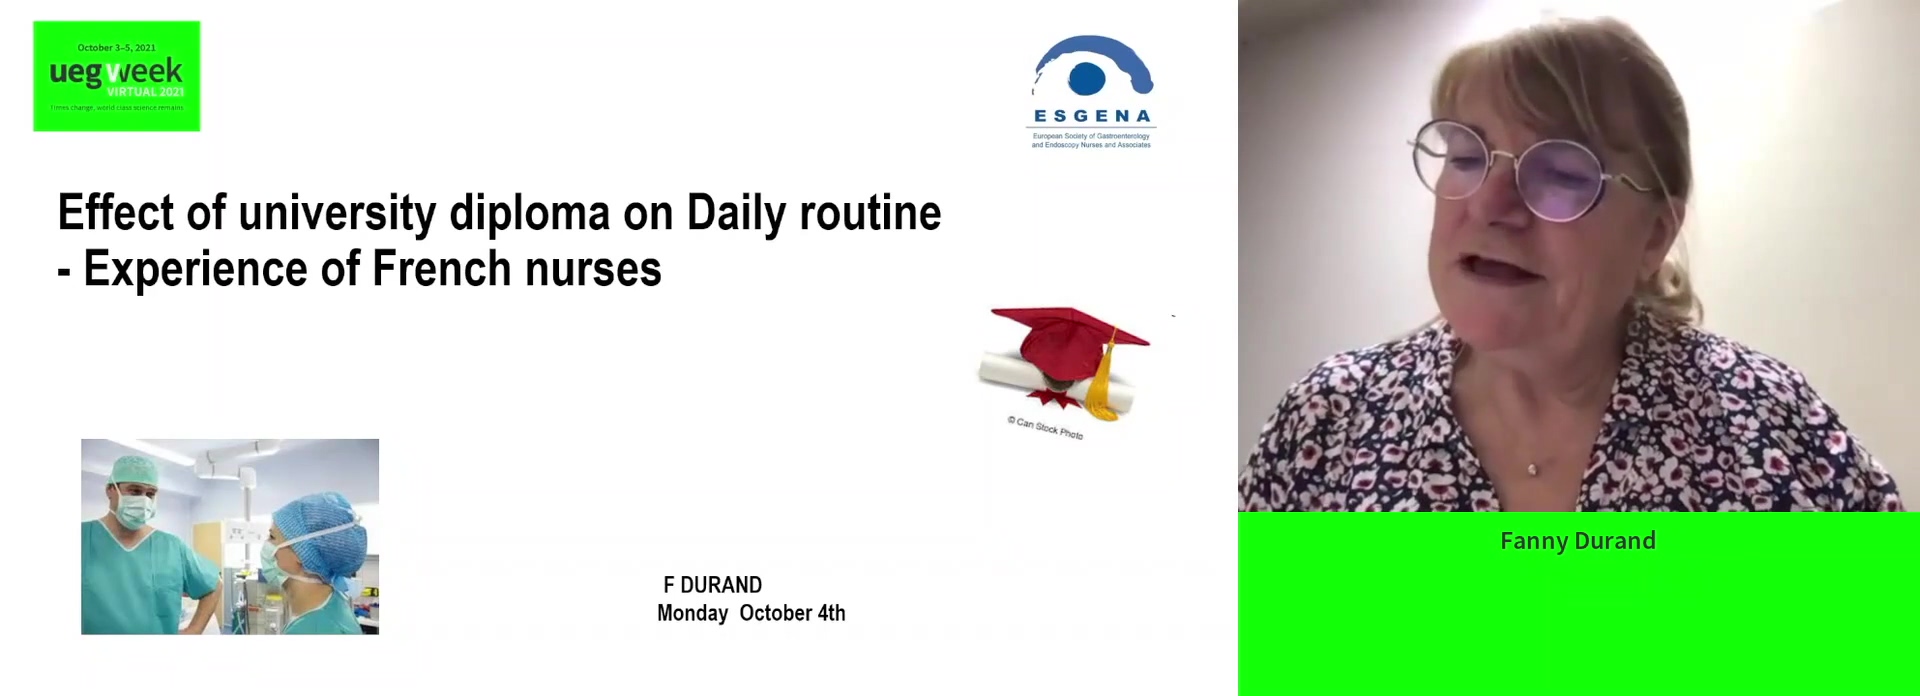 Effect of university diploma on daily routine: Experiences of French nurses